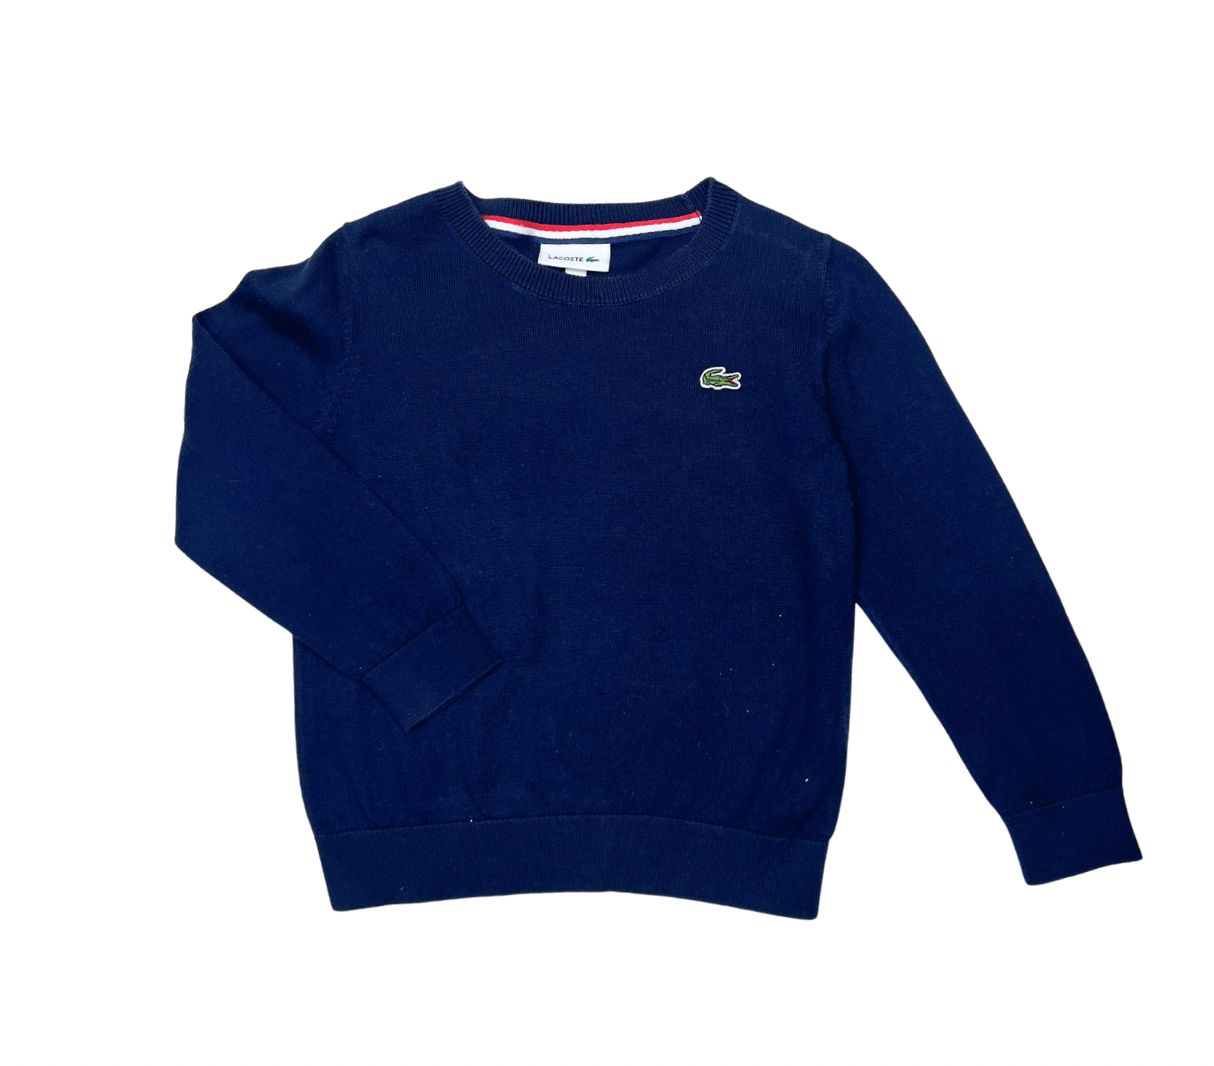 LACOSTE - Pull léger marine - 3 ans